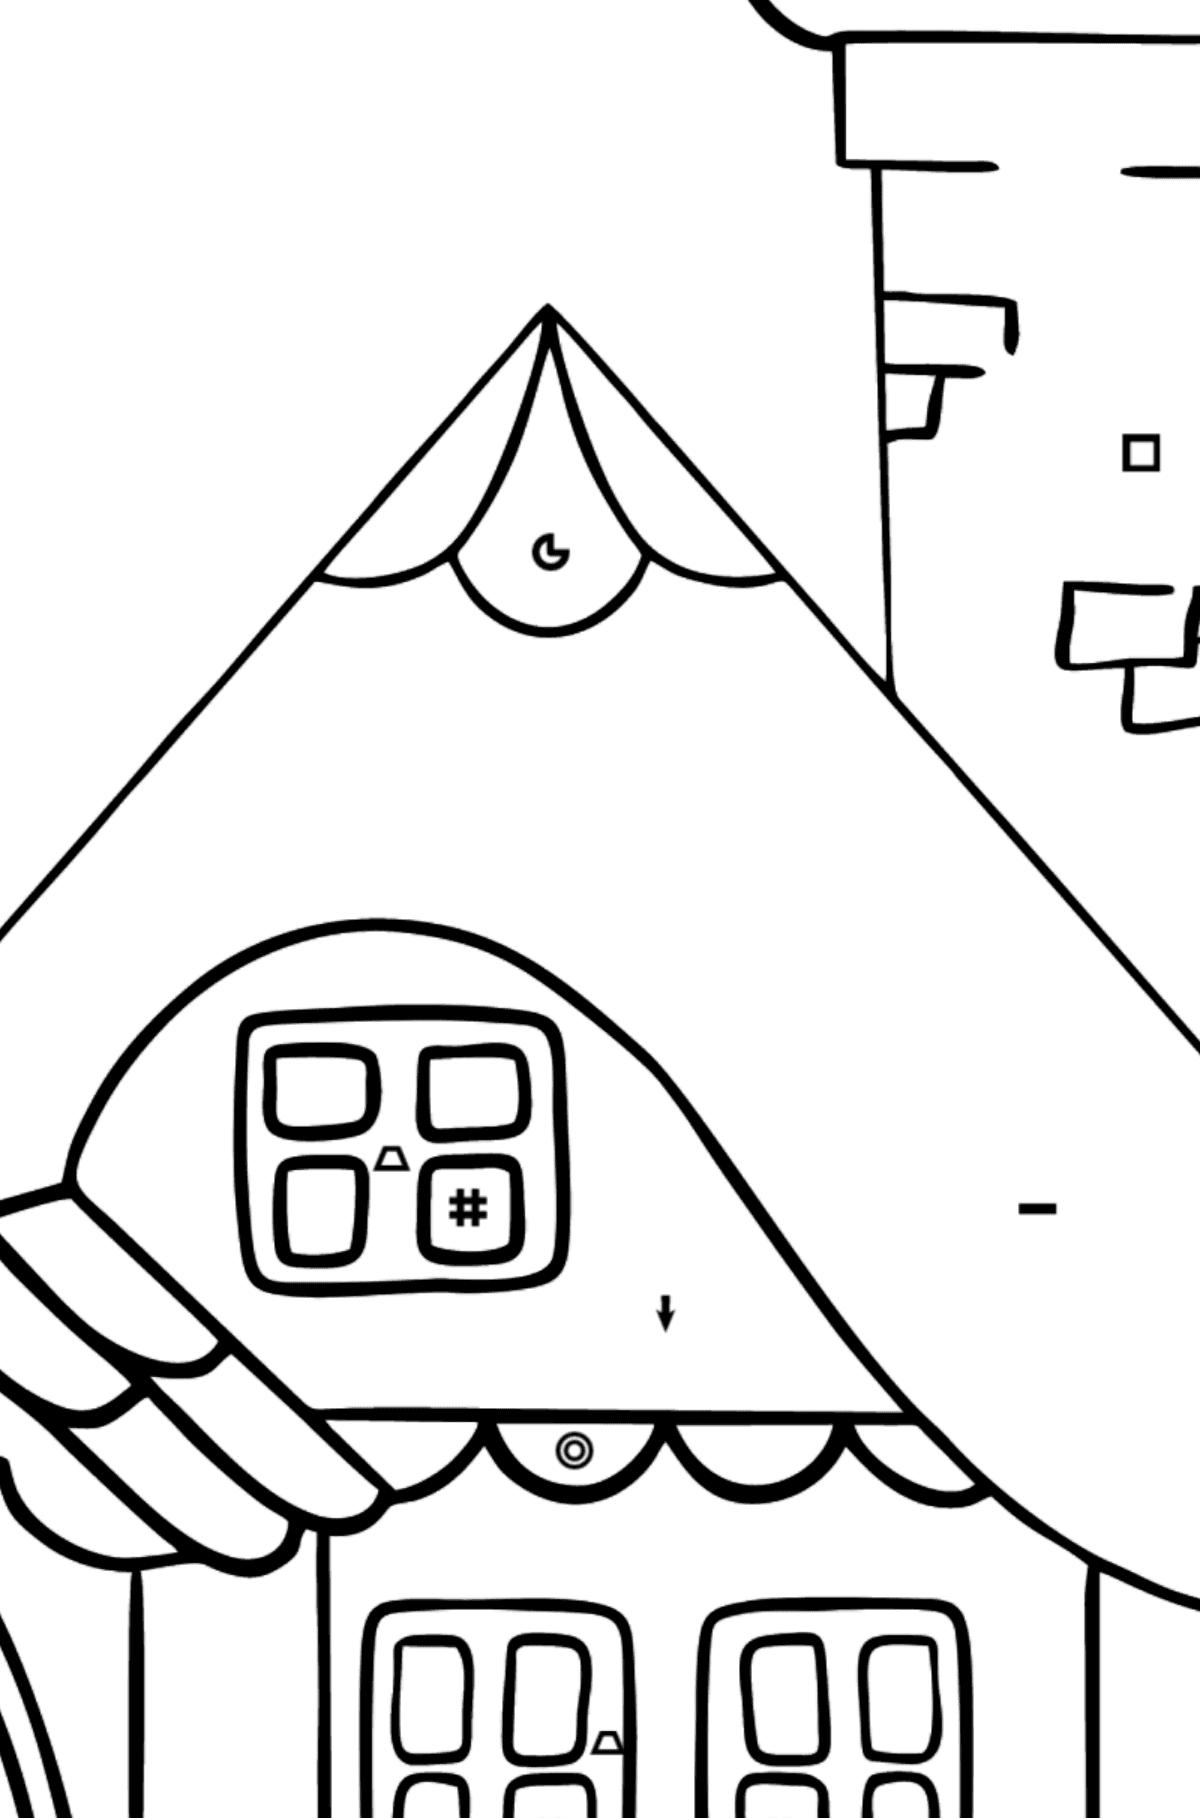 Coloring Page - A Wonderful House - Coloring by Symbols and Geometric Shapes for Kids